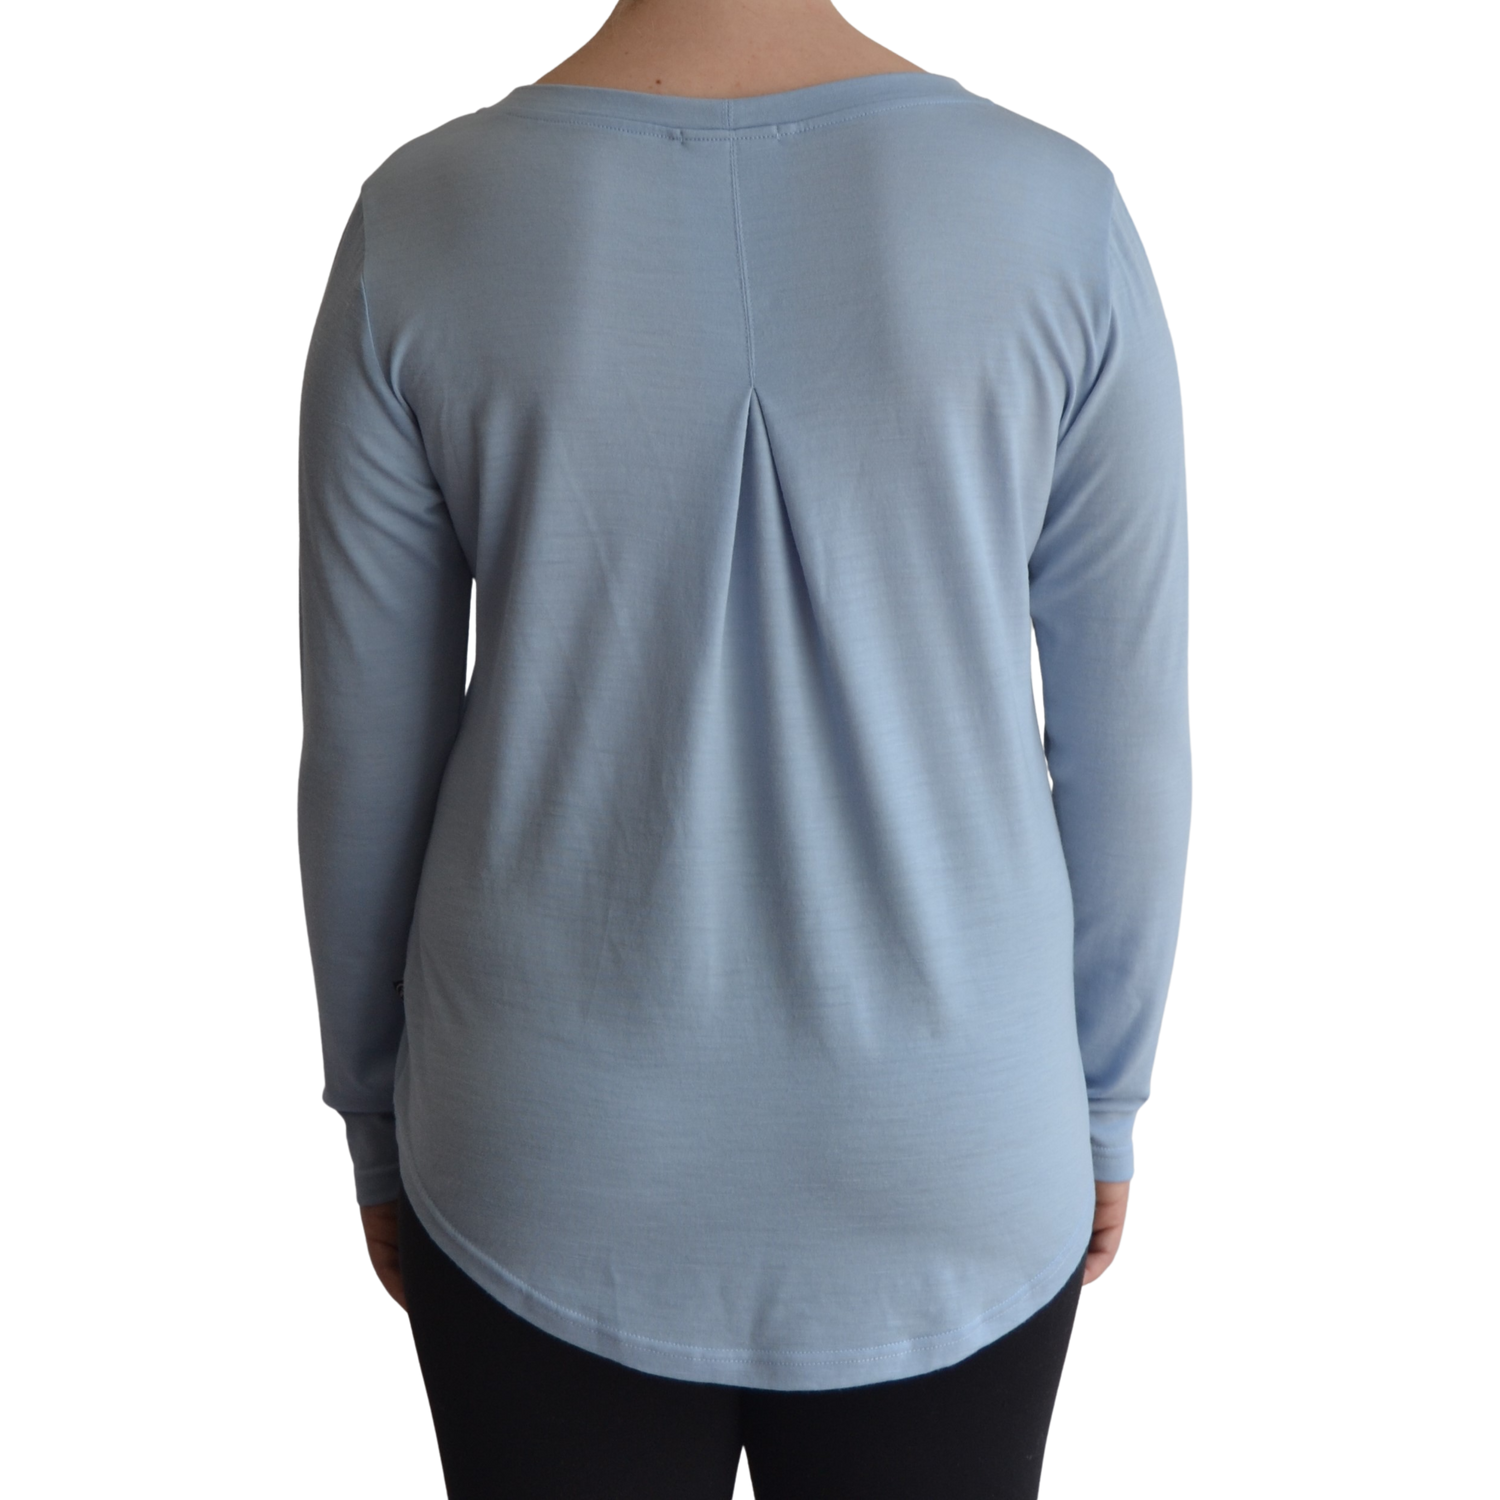 Links long sleeve merino top in ice blue colour, model faces away so the back is showing front on with a box pleat and scooped hemline. 